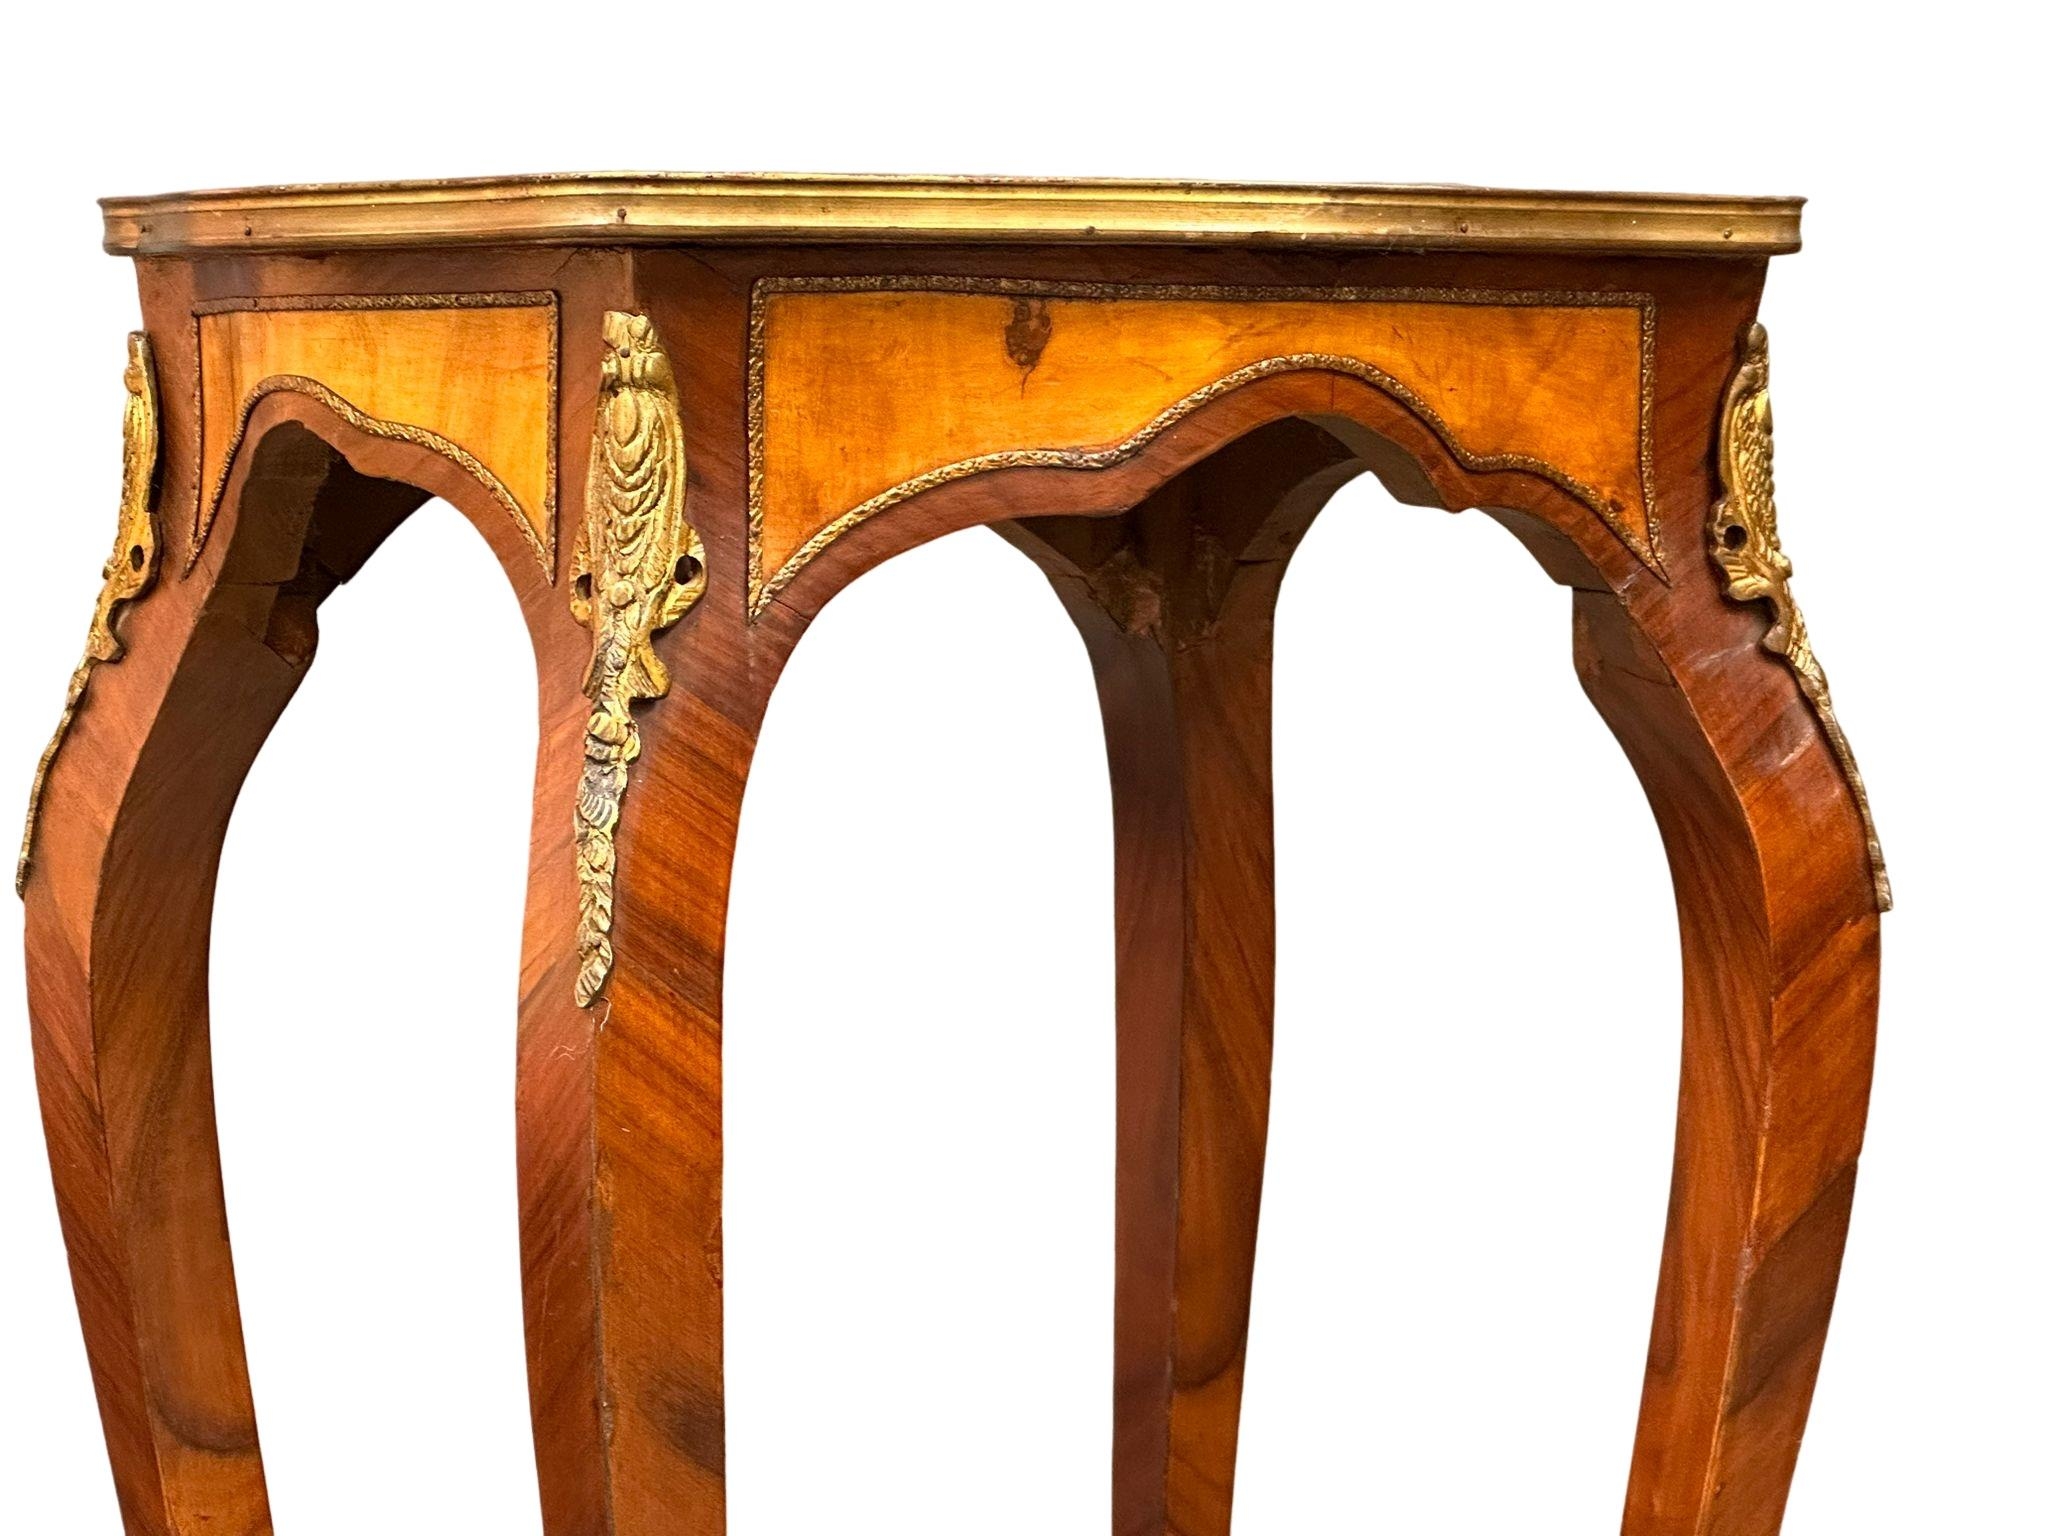 A pair of large Early 20th Century French marquetry inlaid side tables/plantstands with brass ormolu - Image 3 of 4